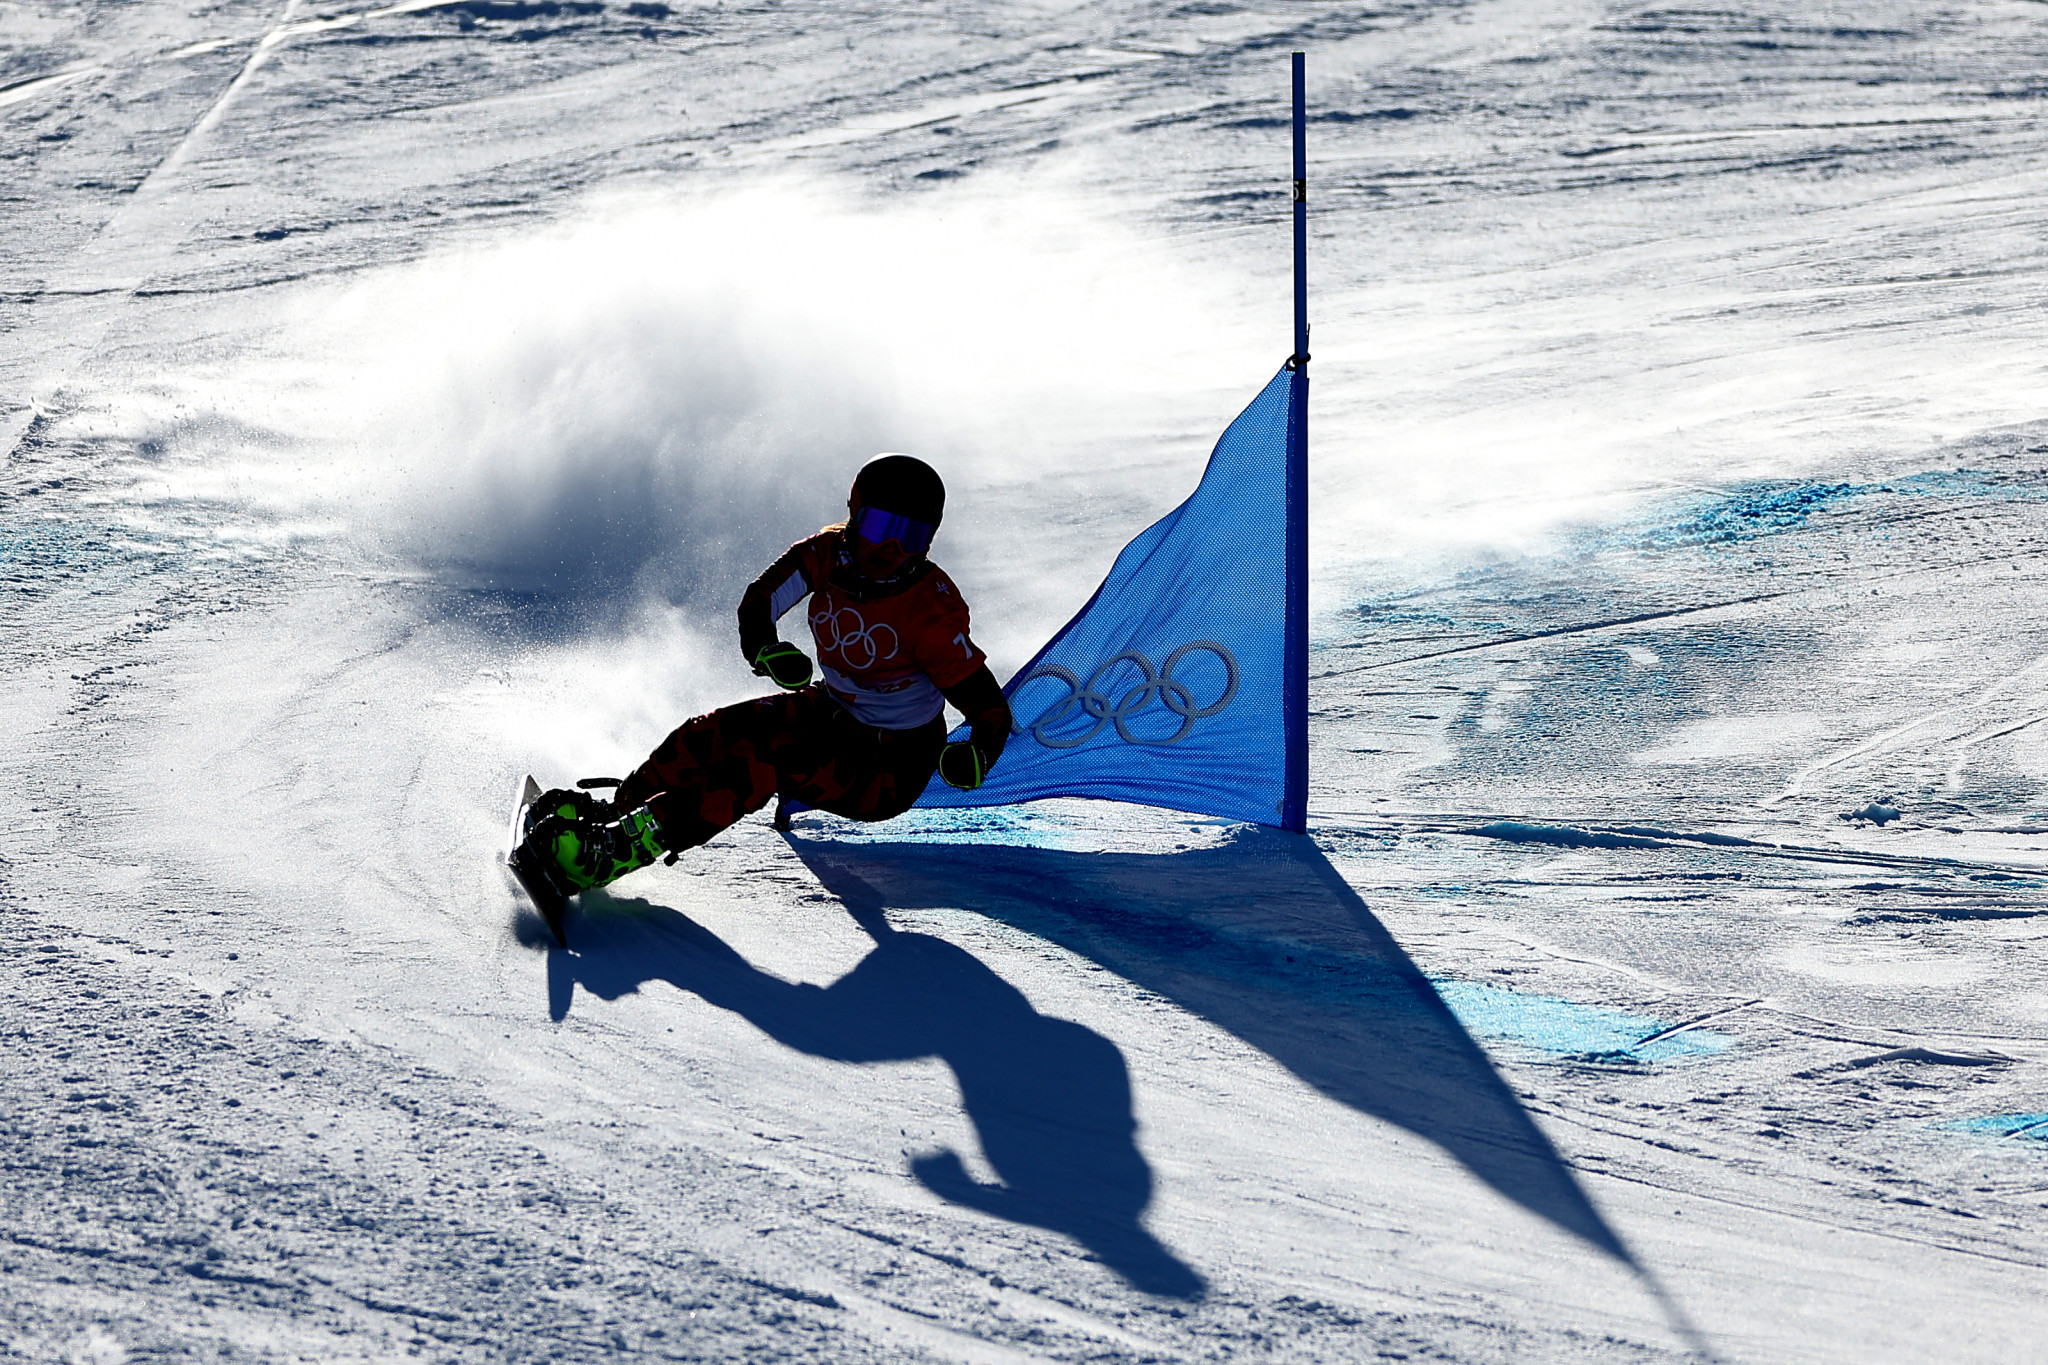 Daniela Ulbing could earn the giant slalom World Cup title ©Getty Images